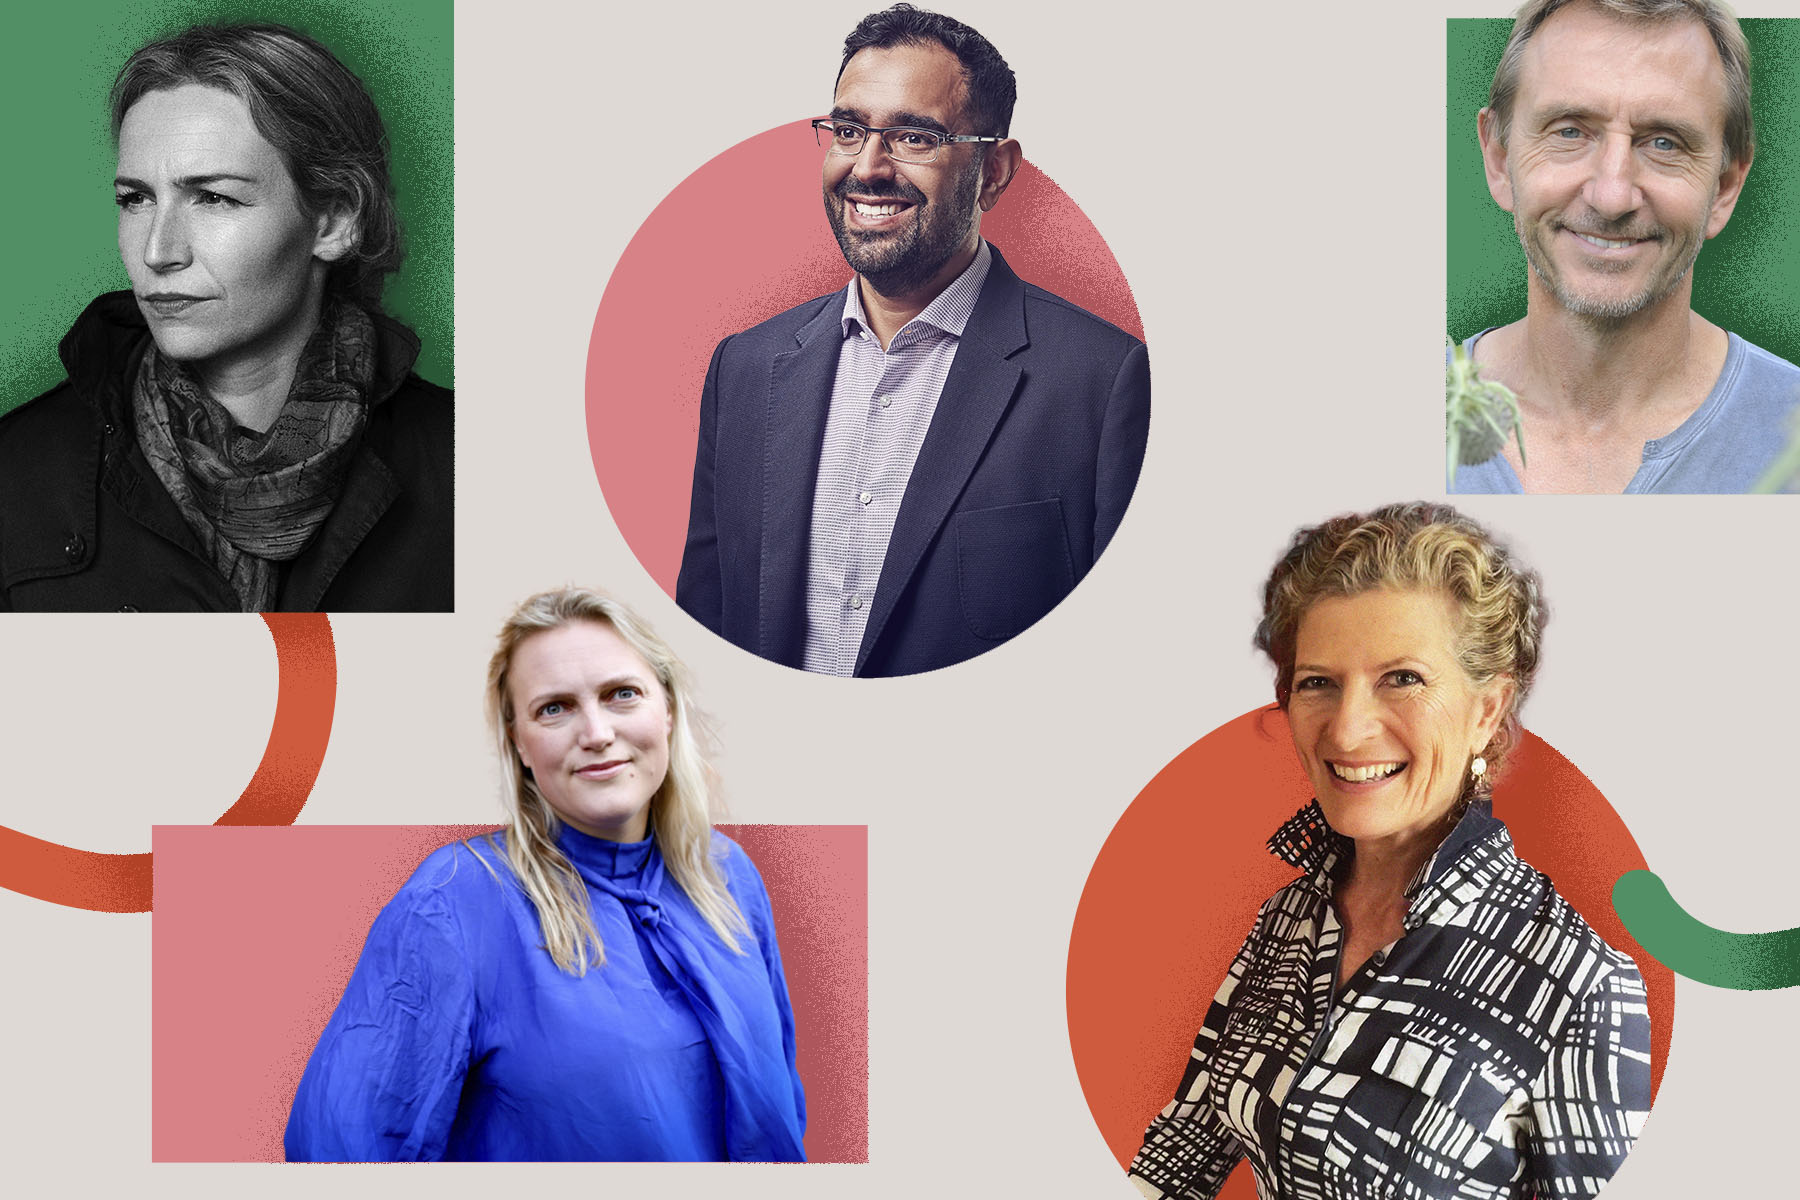 Penguin authors Mary Ann Sieghart, Azeem Azhar and more against a beige background with pink circles, green squares and red squiggles.